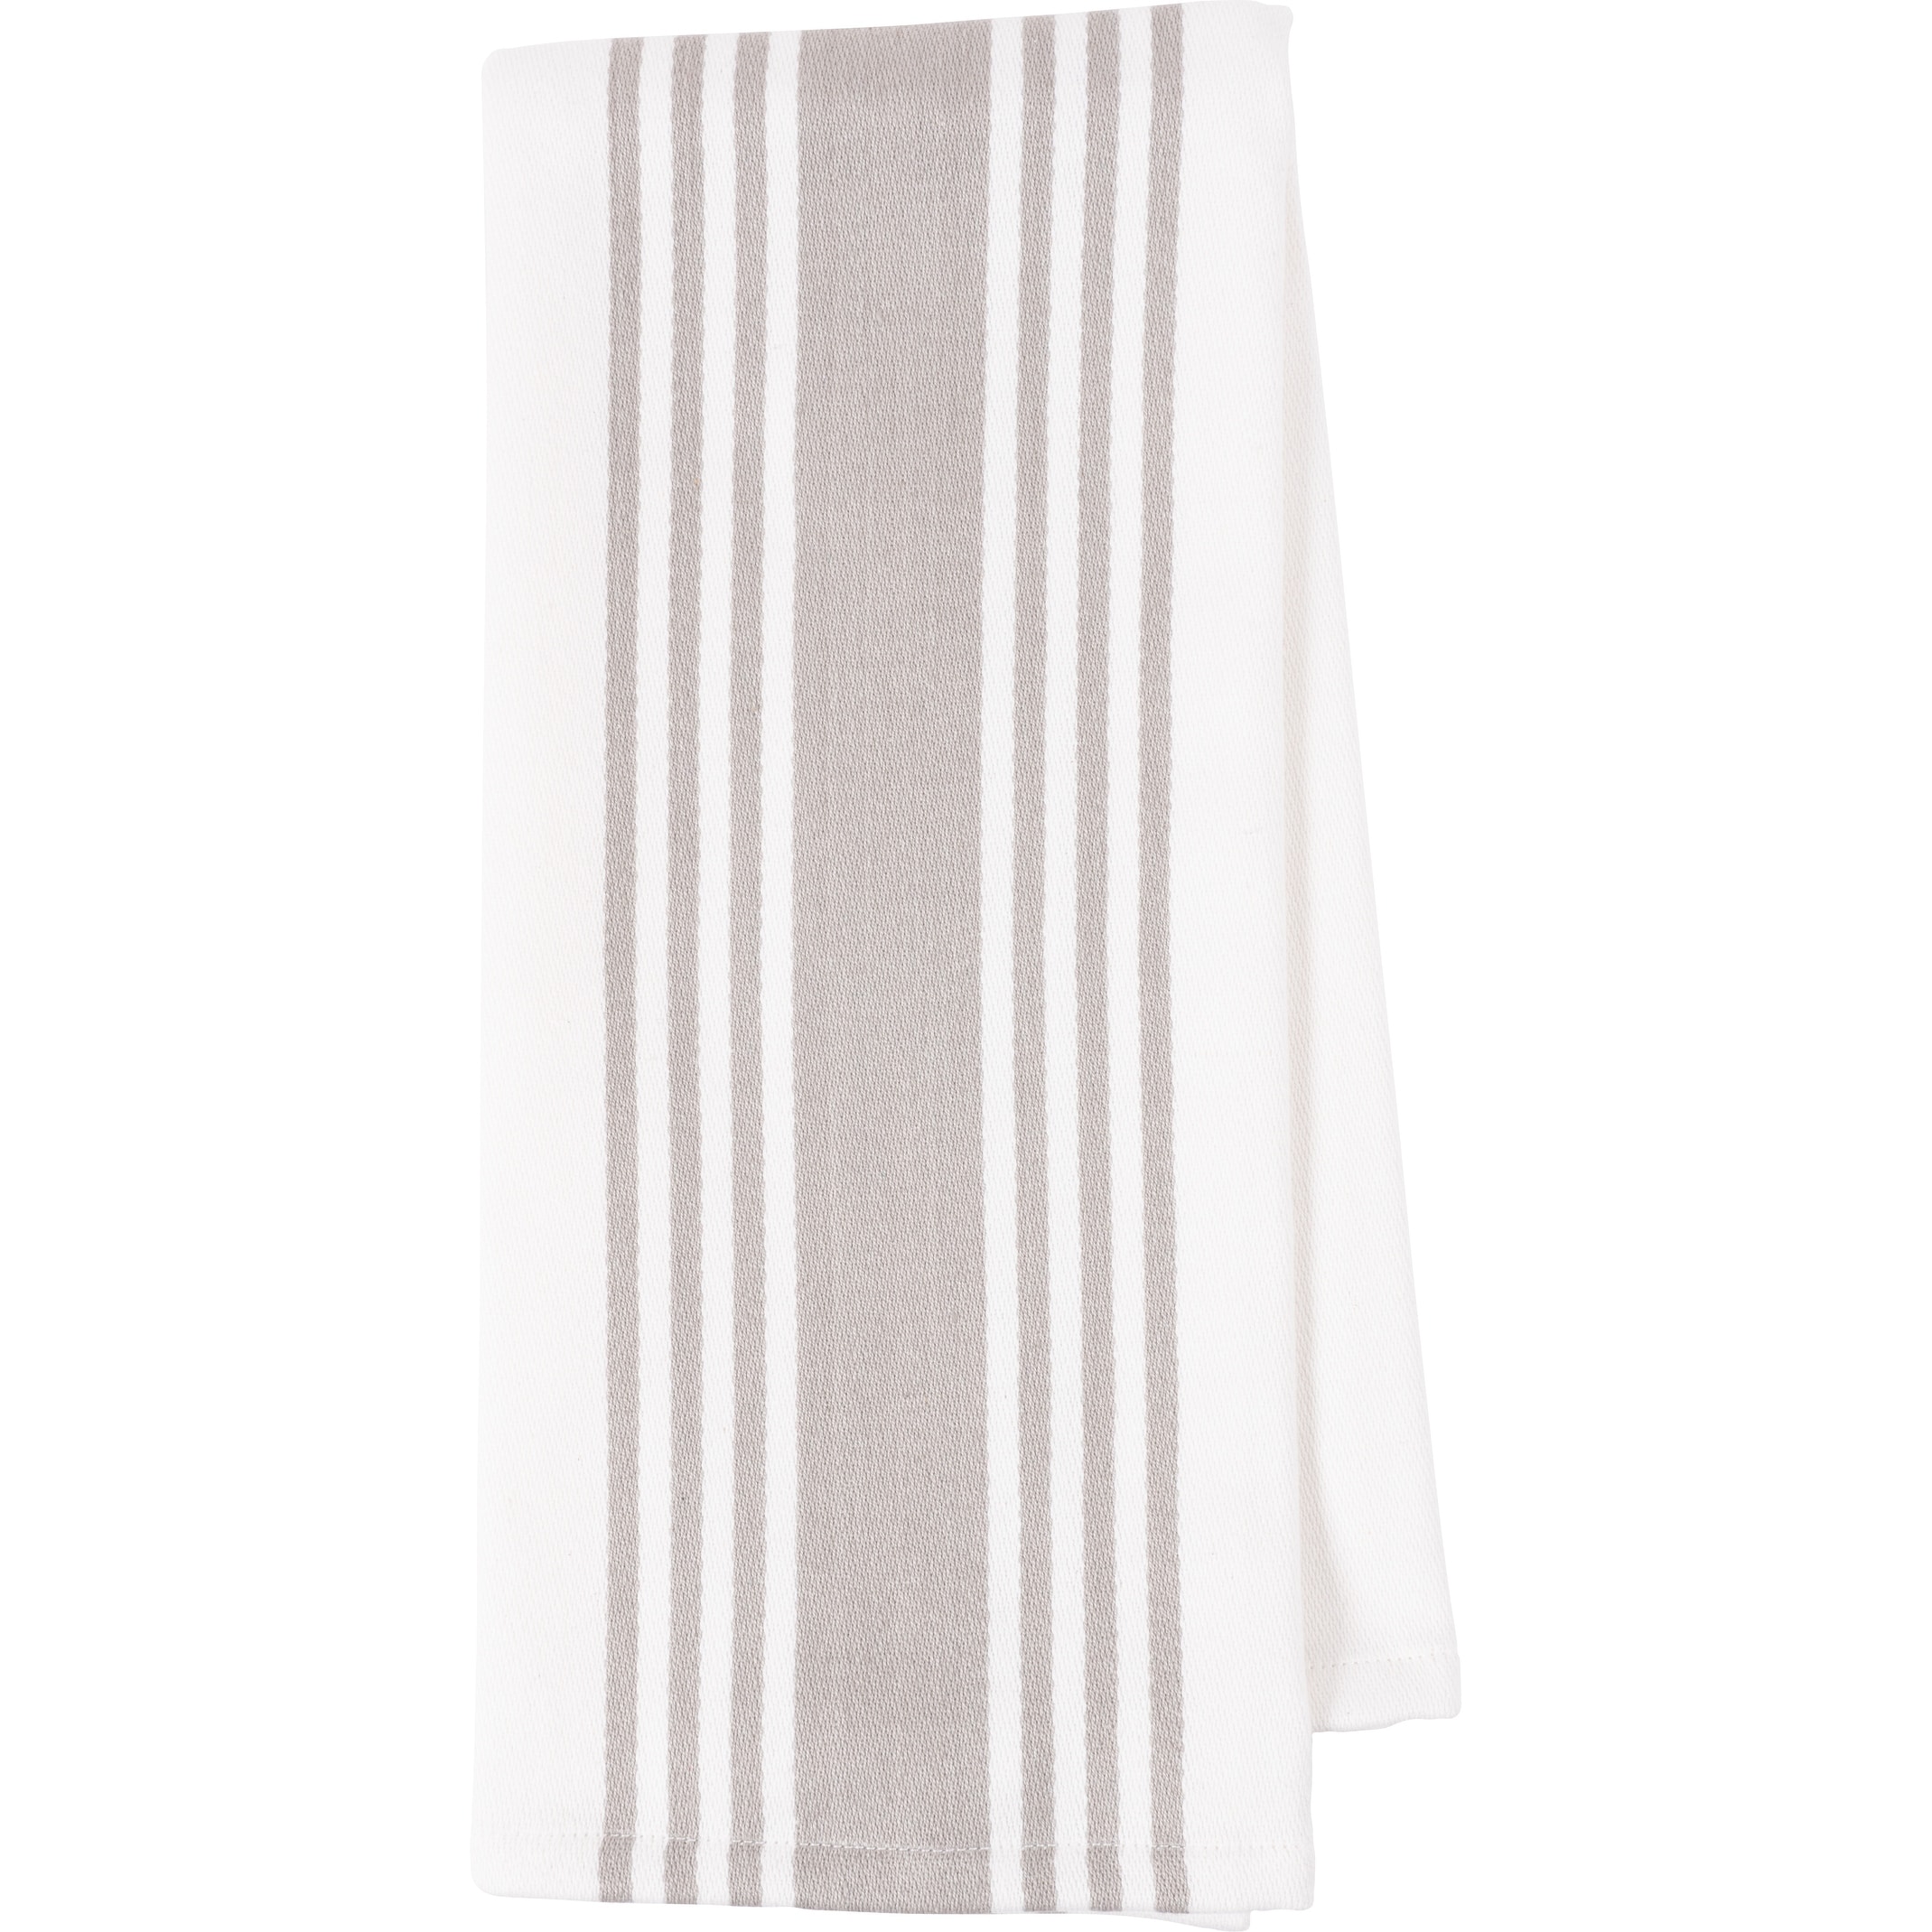 T-fal Textiles 4 Pack Solid & Stripe Waffle Terry Kitchen Dish Towel Set -  On Sale - Bed Bath & Beyond - 15872033